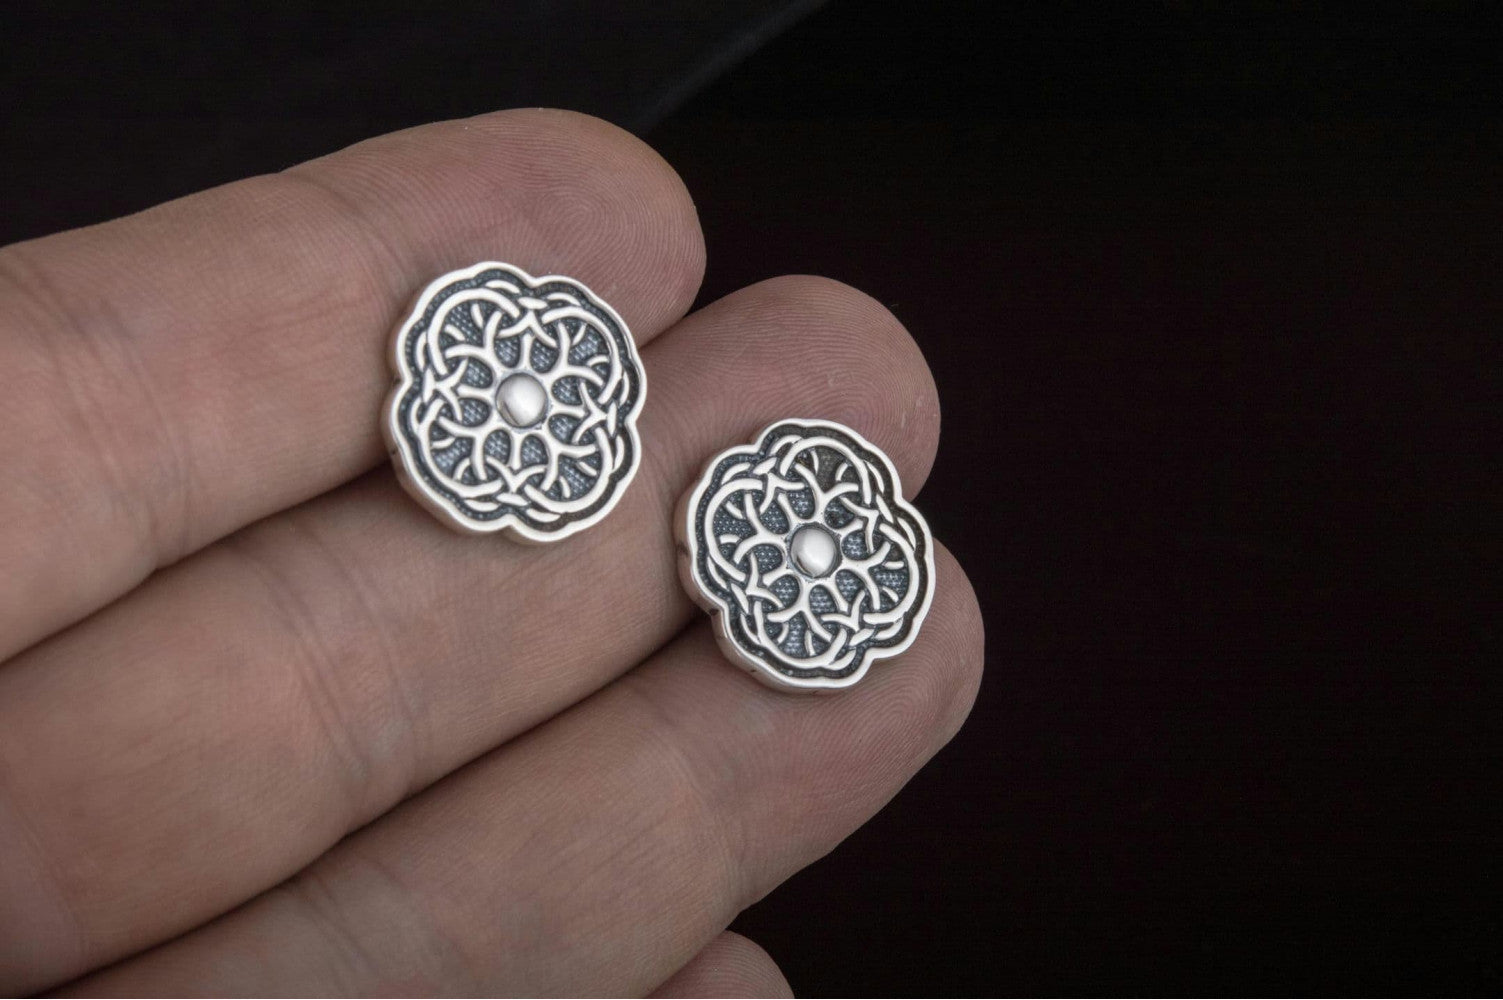 Unique Cufflinks with Ornament Sterling Silver Handmade Jewelry V04